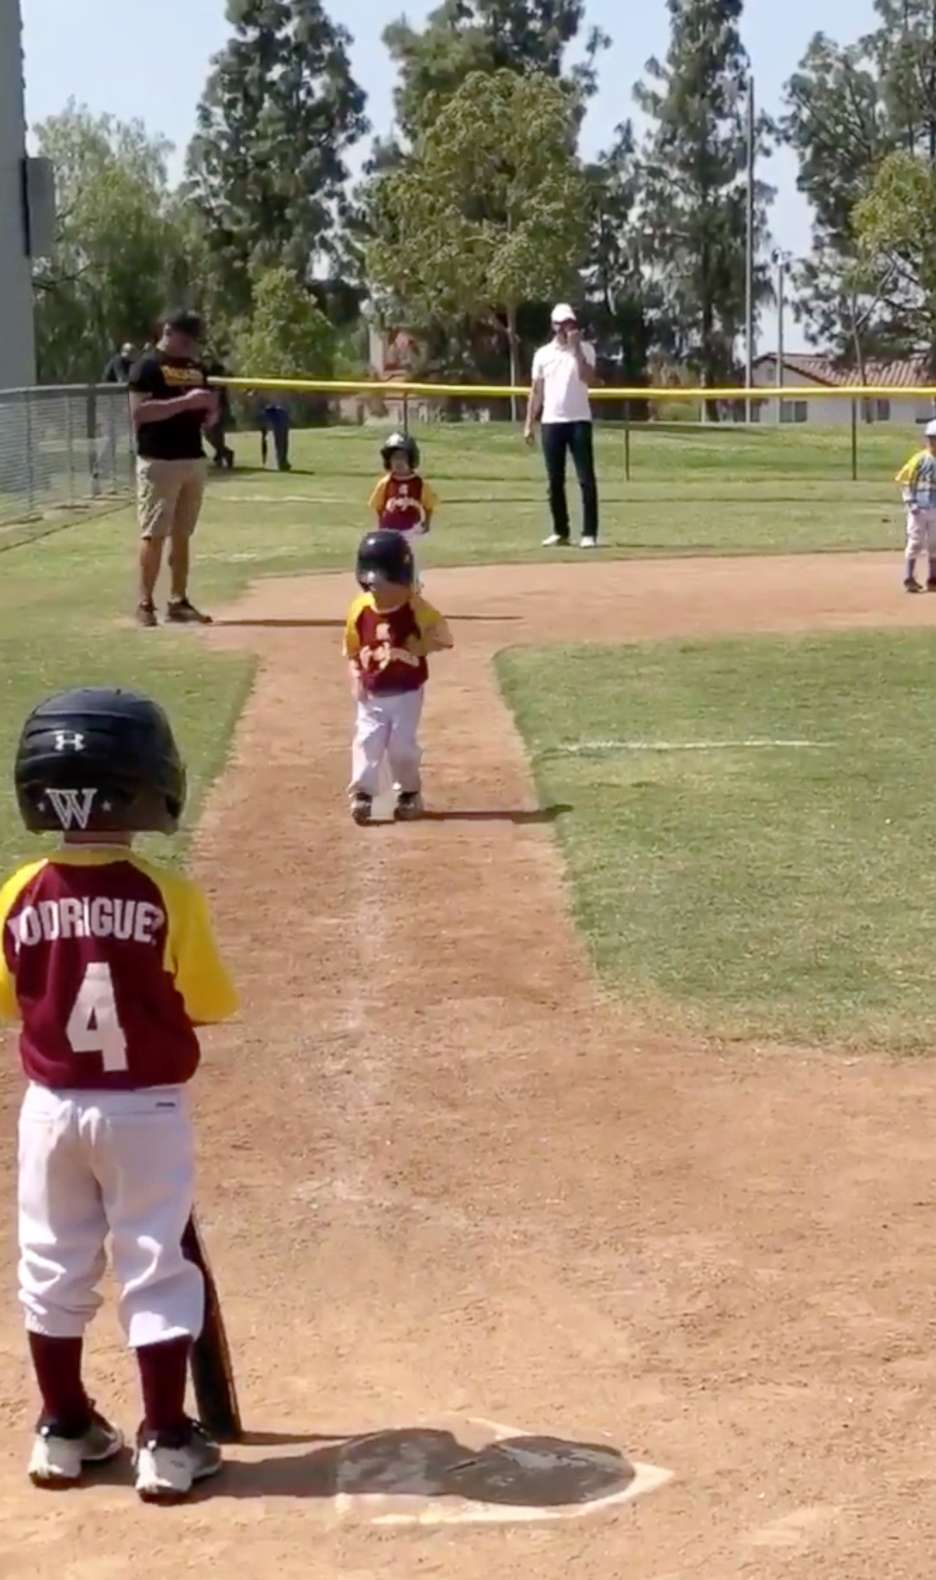 PHOTO: 3-year-old Lennox Salcedo was told to “run home as fast as he can” during a baseball game. He delivered the performance of a lifetime.